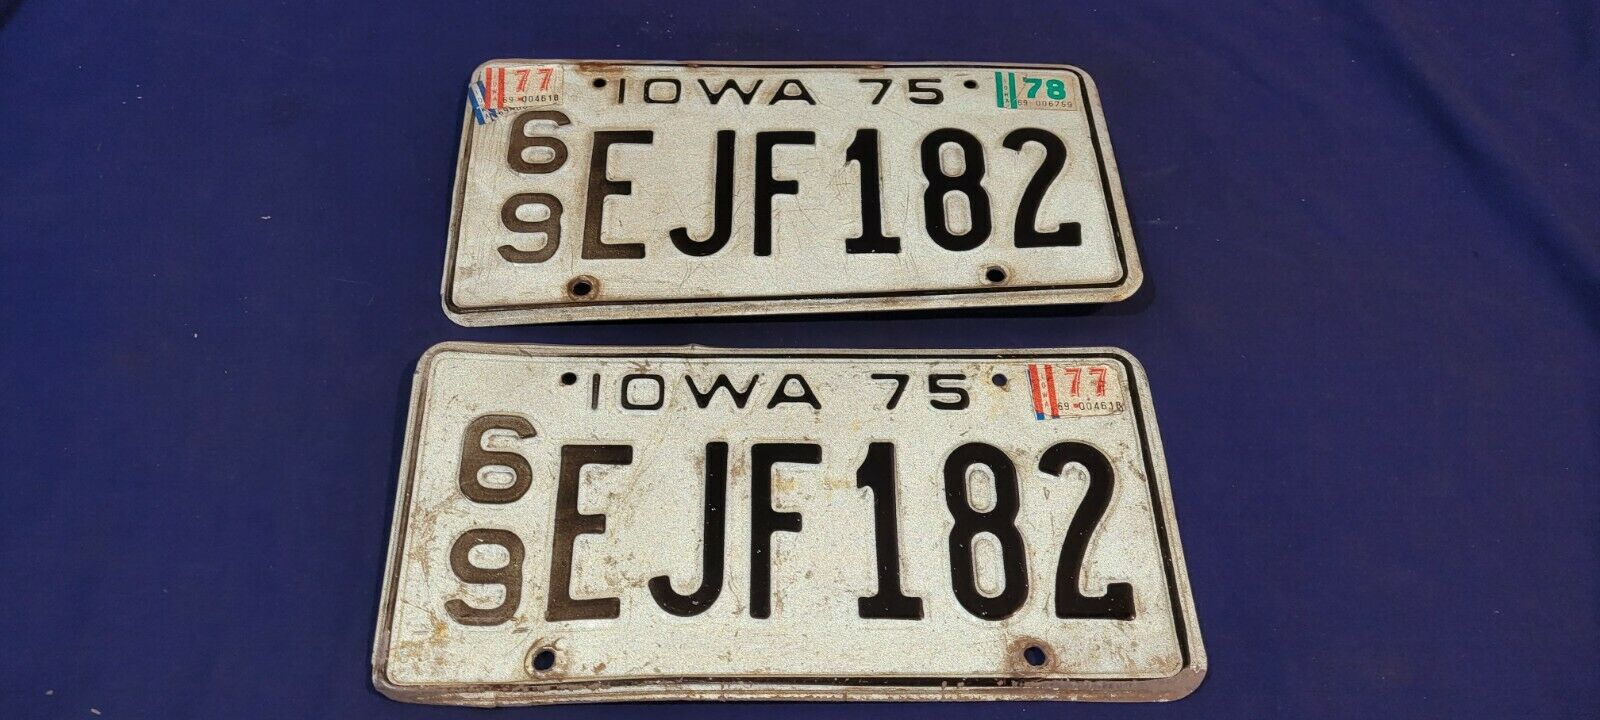 1975 Iowa License Plate Pair County 69  #ejf182 Shipping Included